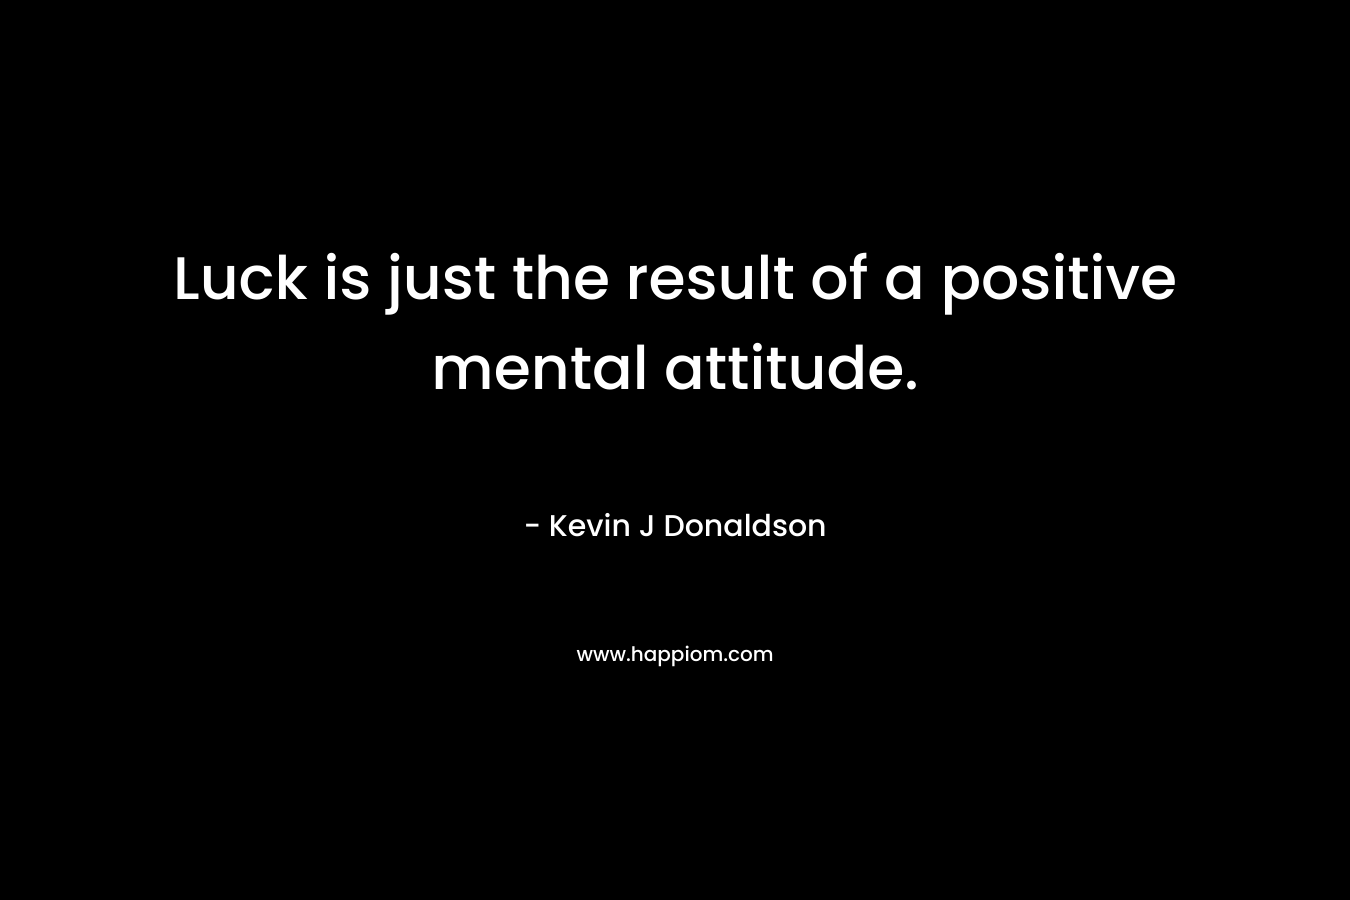 Luck is just the result of a positive mental attitude.